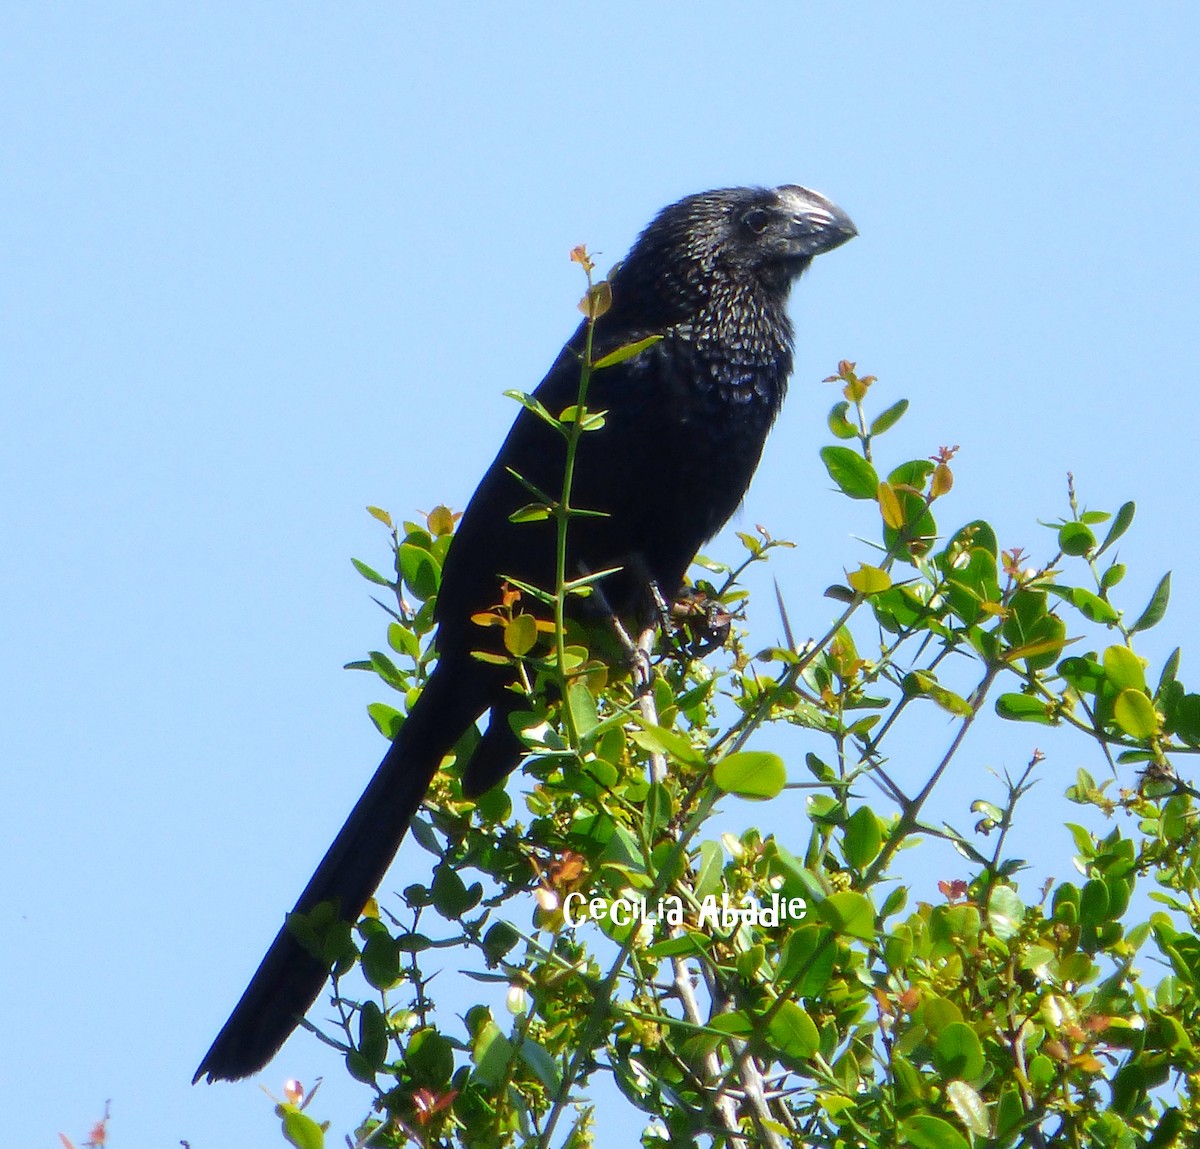 Smooth-billed Ani - Cecilia  Abadie